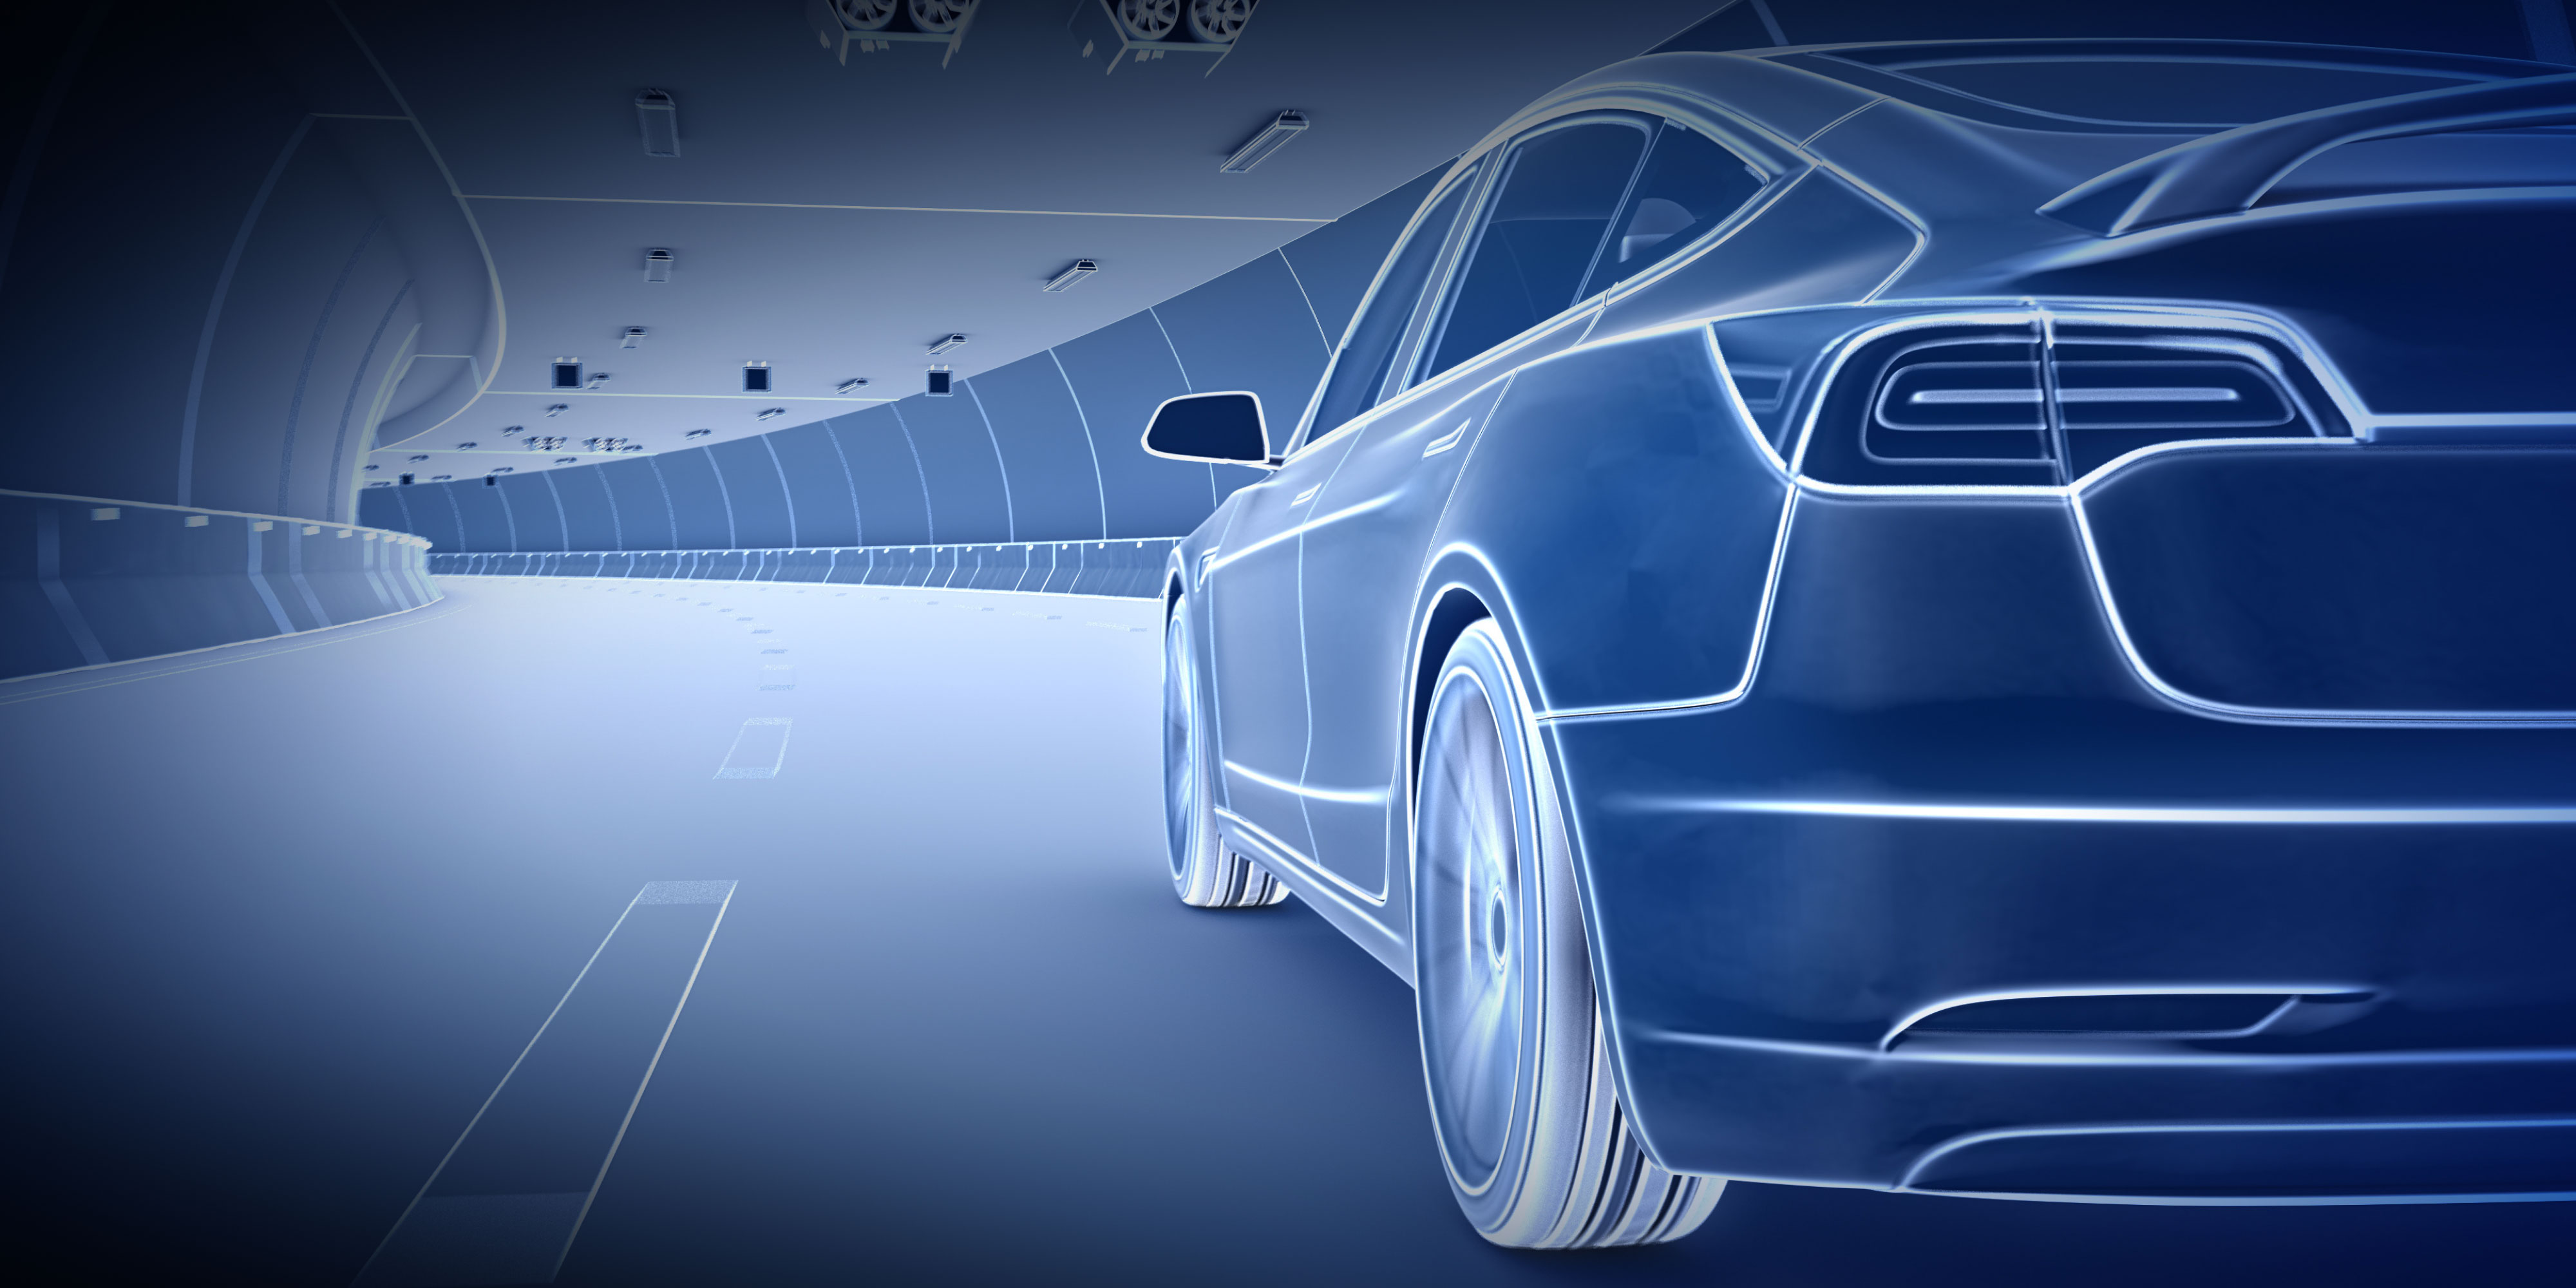 Illustration of a car with an ADAS system active in a tunnel